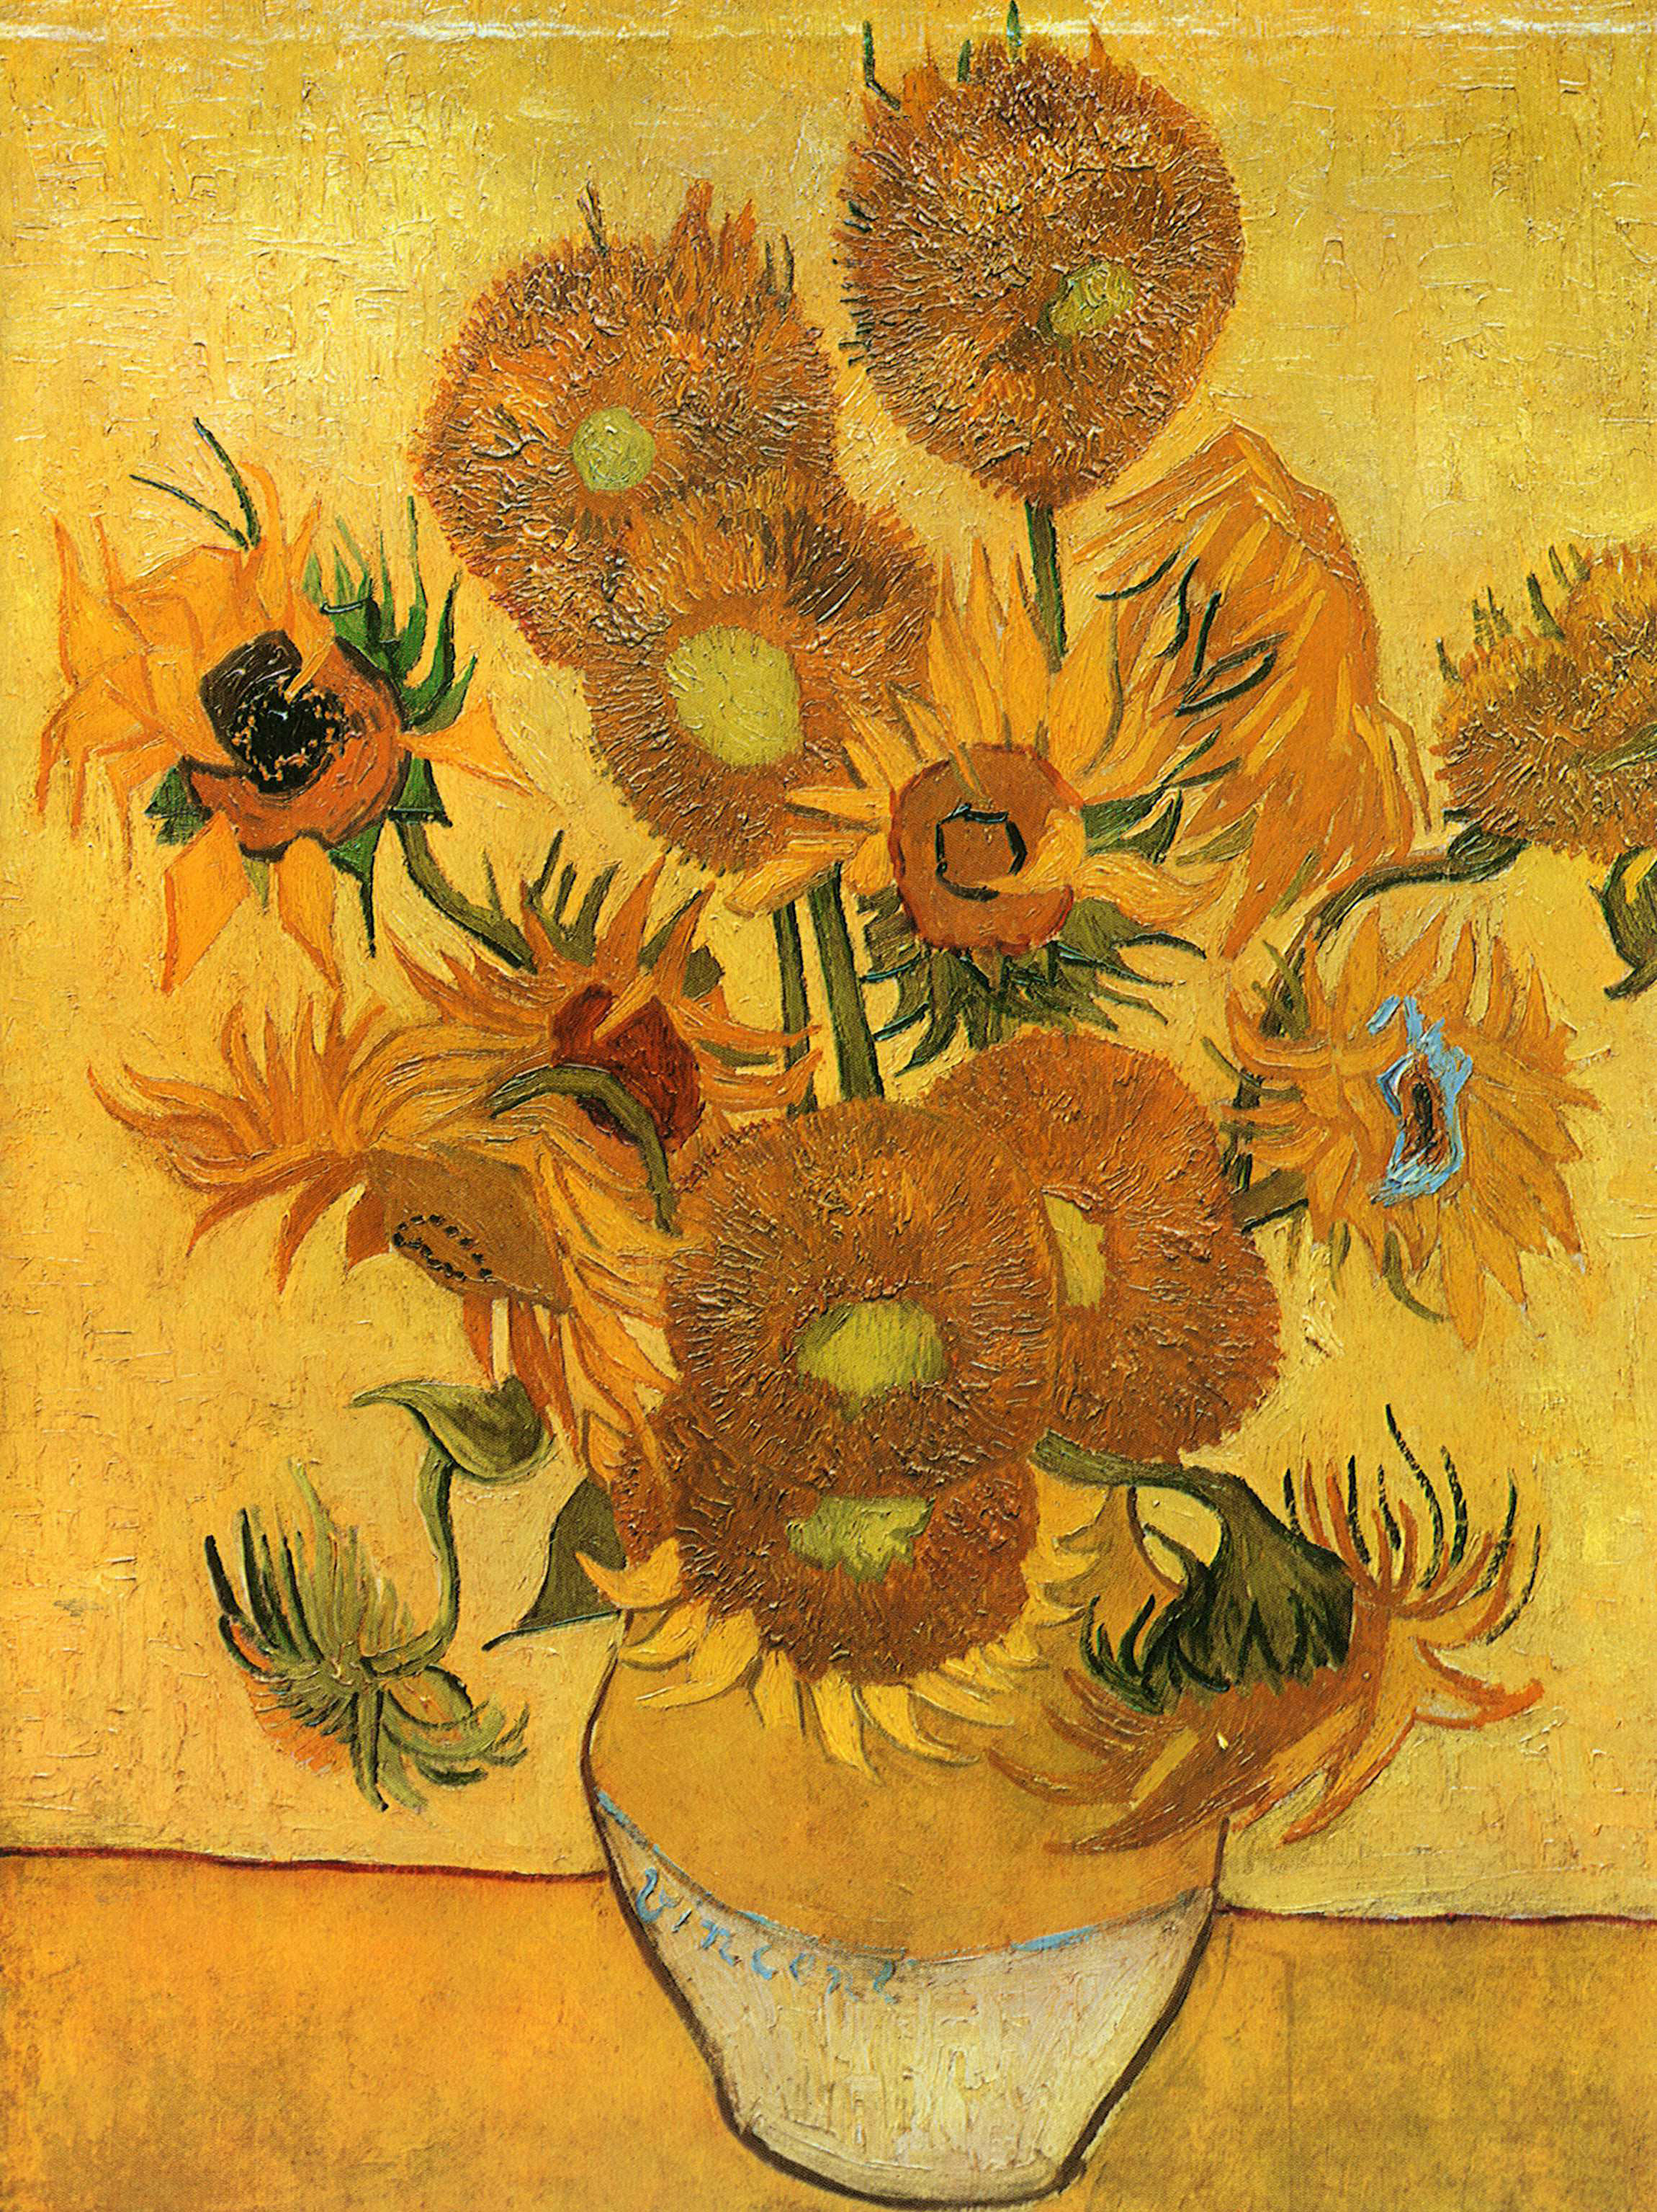 van gogh tumblr themes .10 (with images) Art · Top eFrame (Part.2) Popular Themes